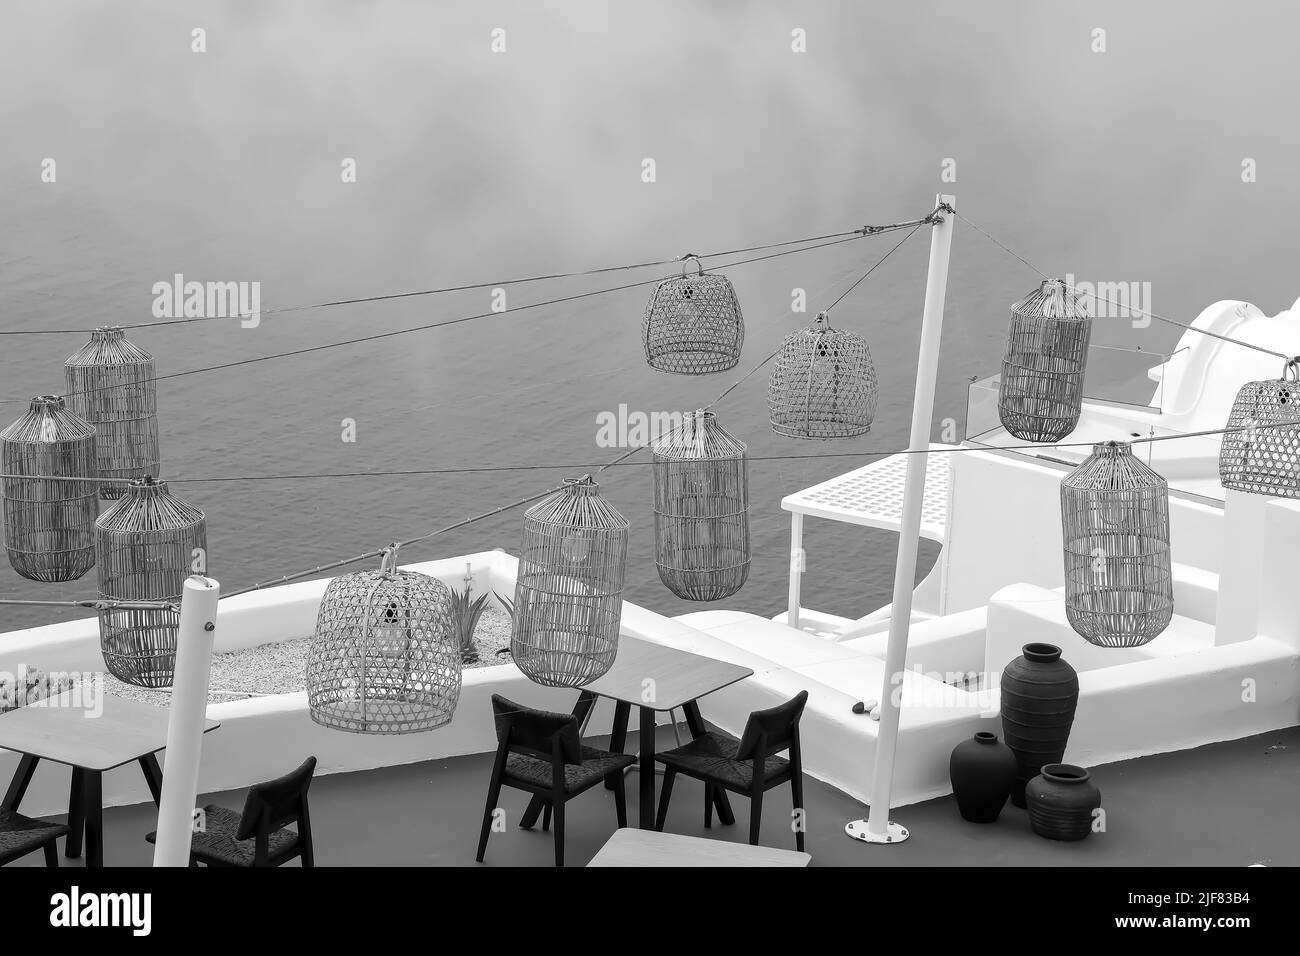 Santorini, Greece - May 13, 2021 :  View of a picturesque terrace decorated with tables, chairs  and lights overlooking the Aegean Sea in black and white Stock Photo